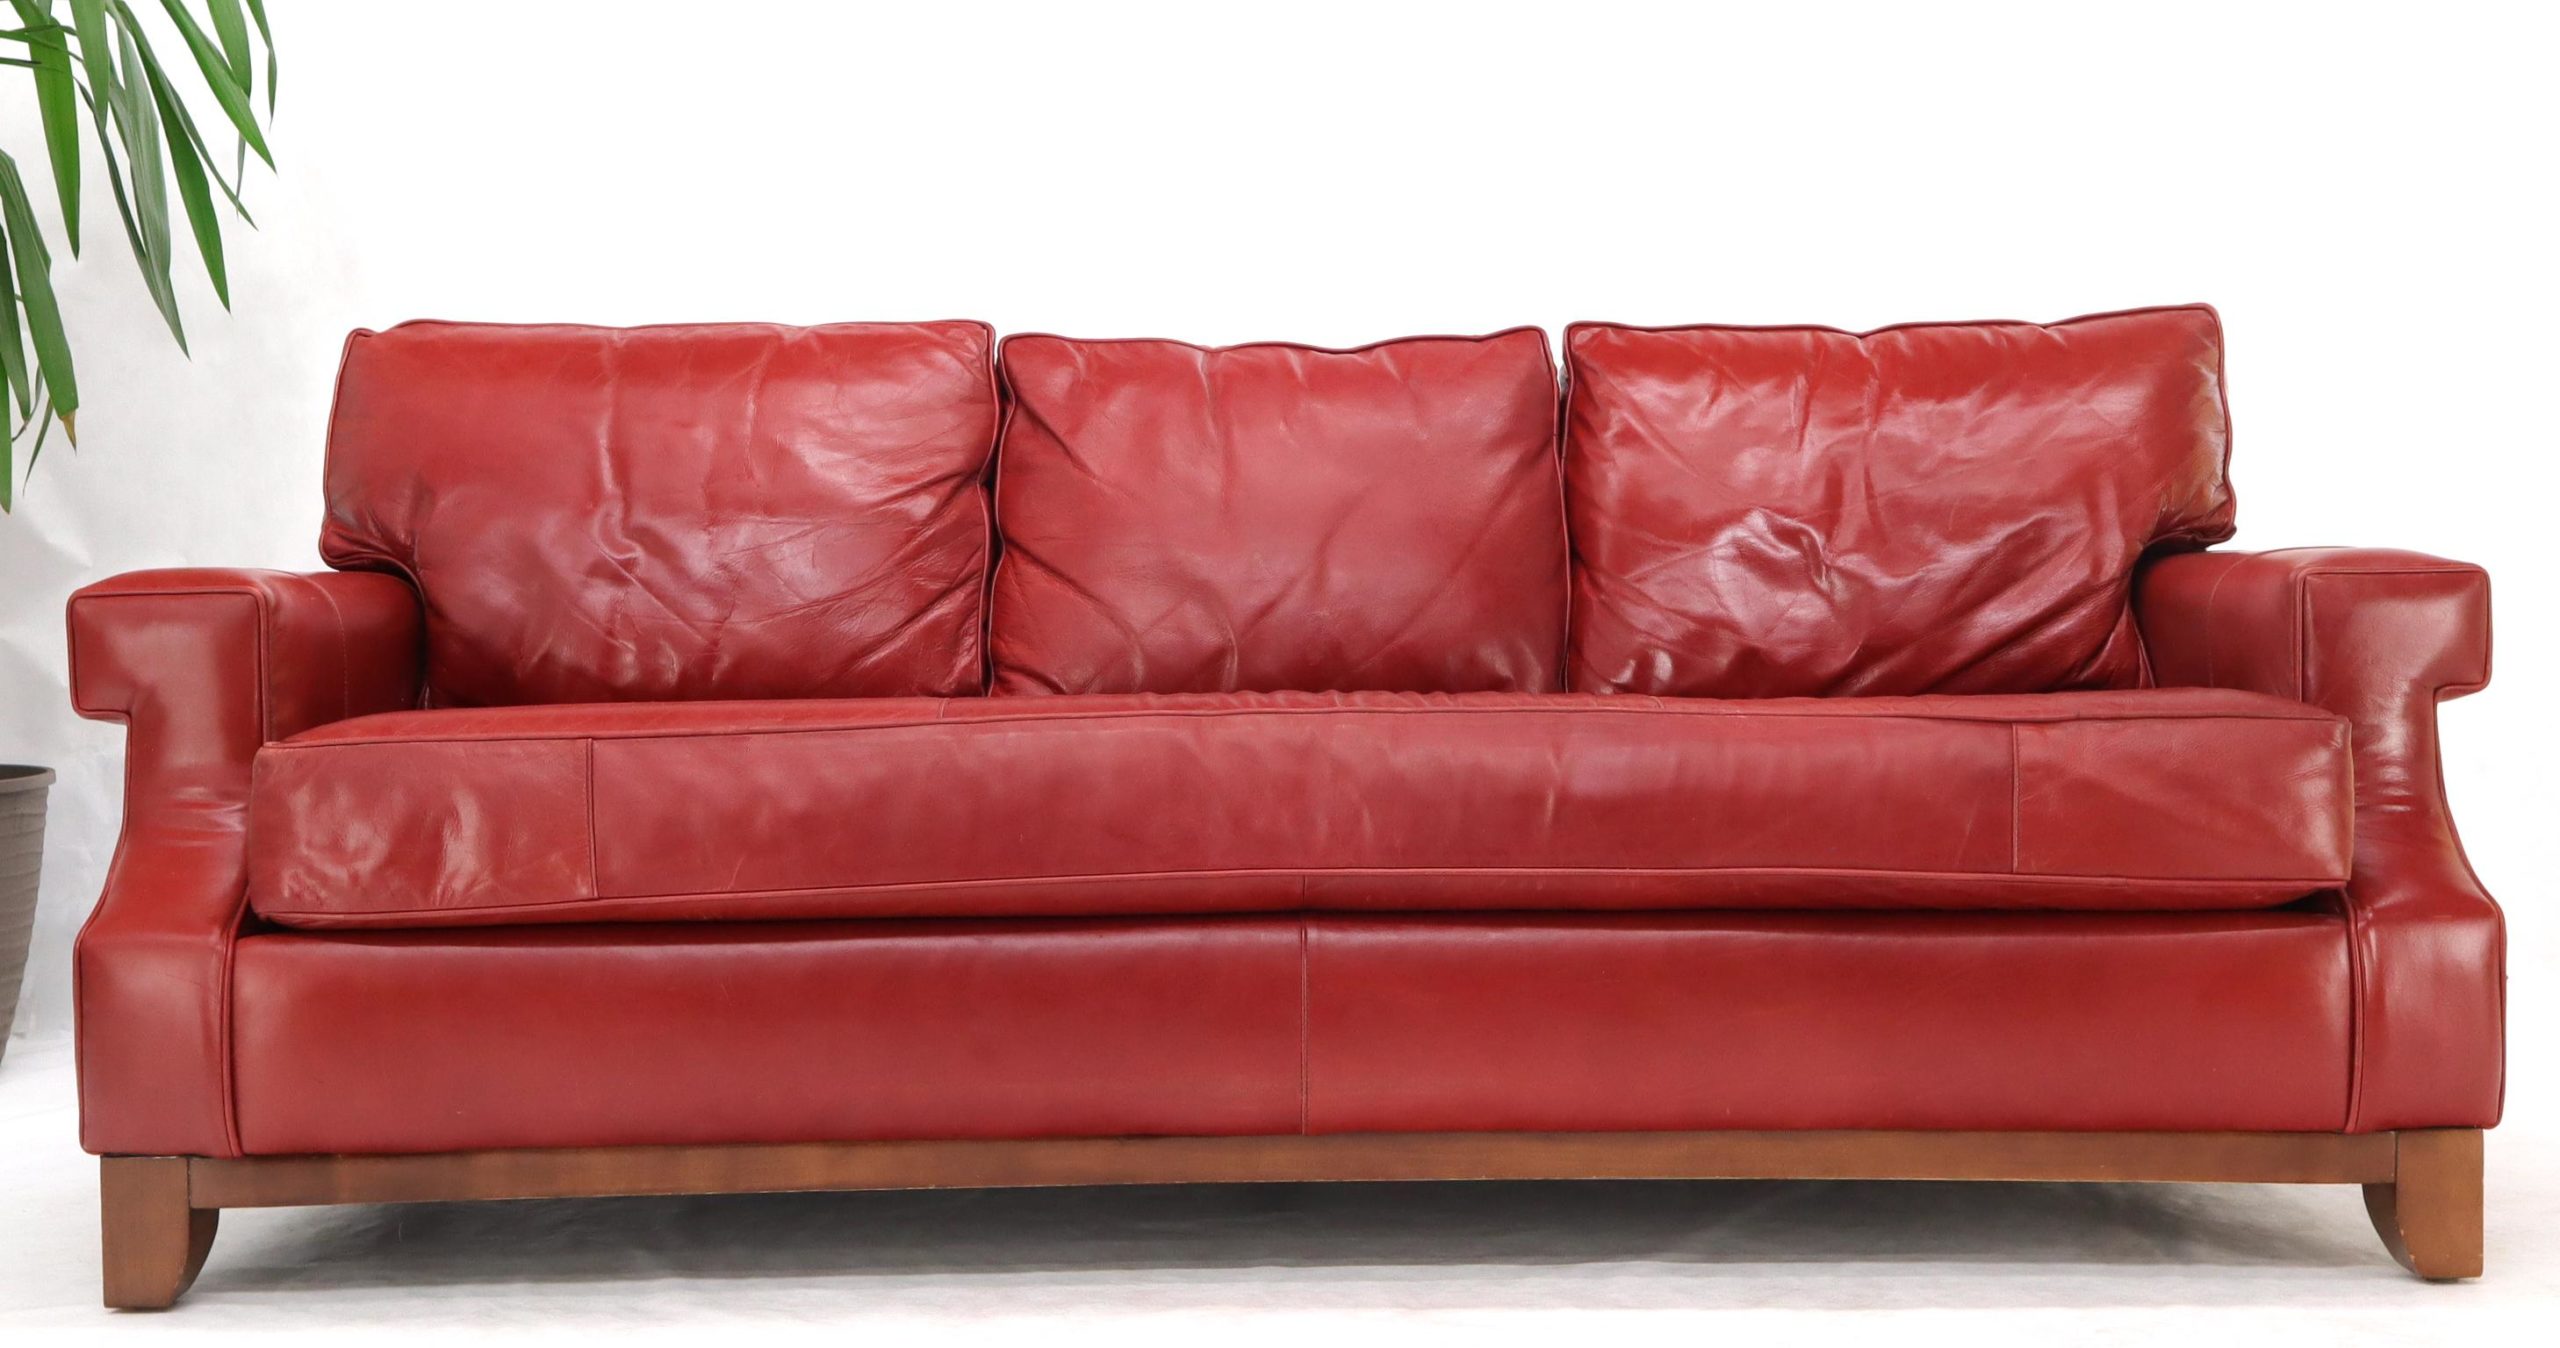 Concave Front Edge Tomato Red Leather, Thomasville Leather Couch